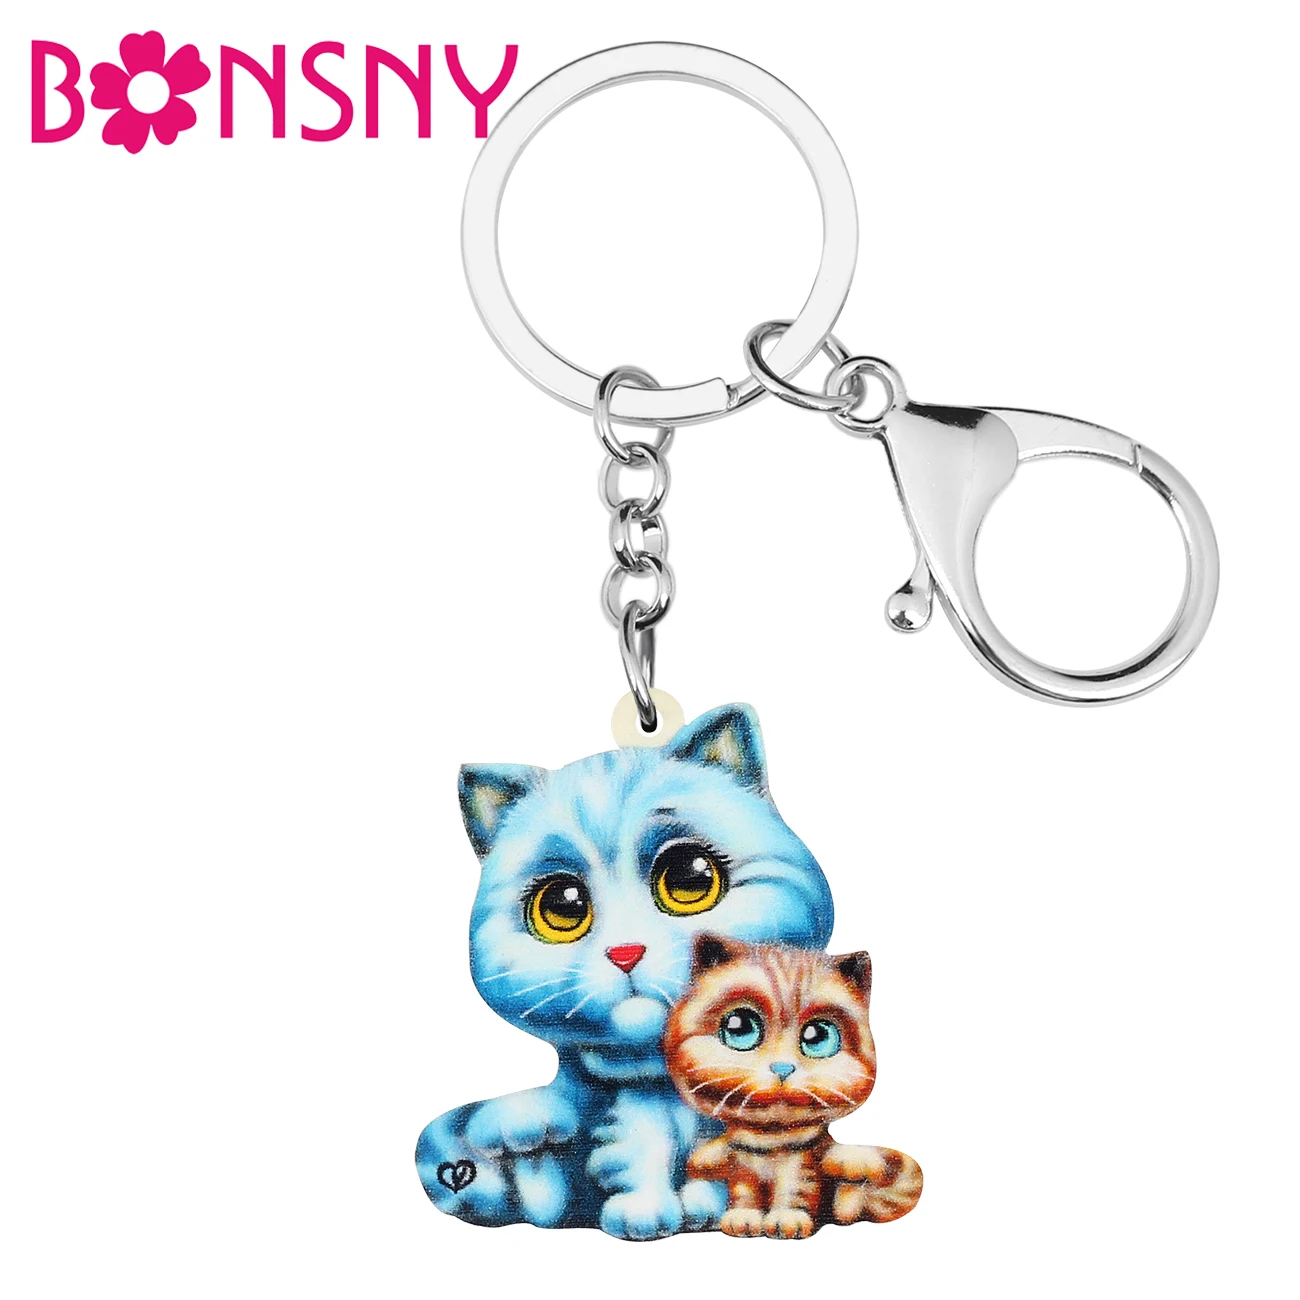 

BONSNY Acrylic Blue Cartoon Cat Kitten Keychains Ring Fashion Key Chain Charms Novelty Pets Jewelry For Women Girls Teens Gift